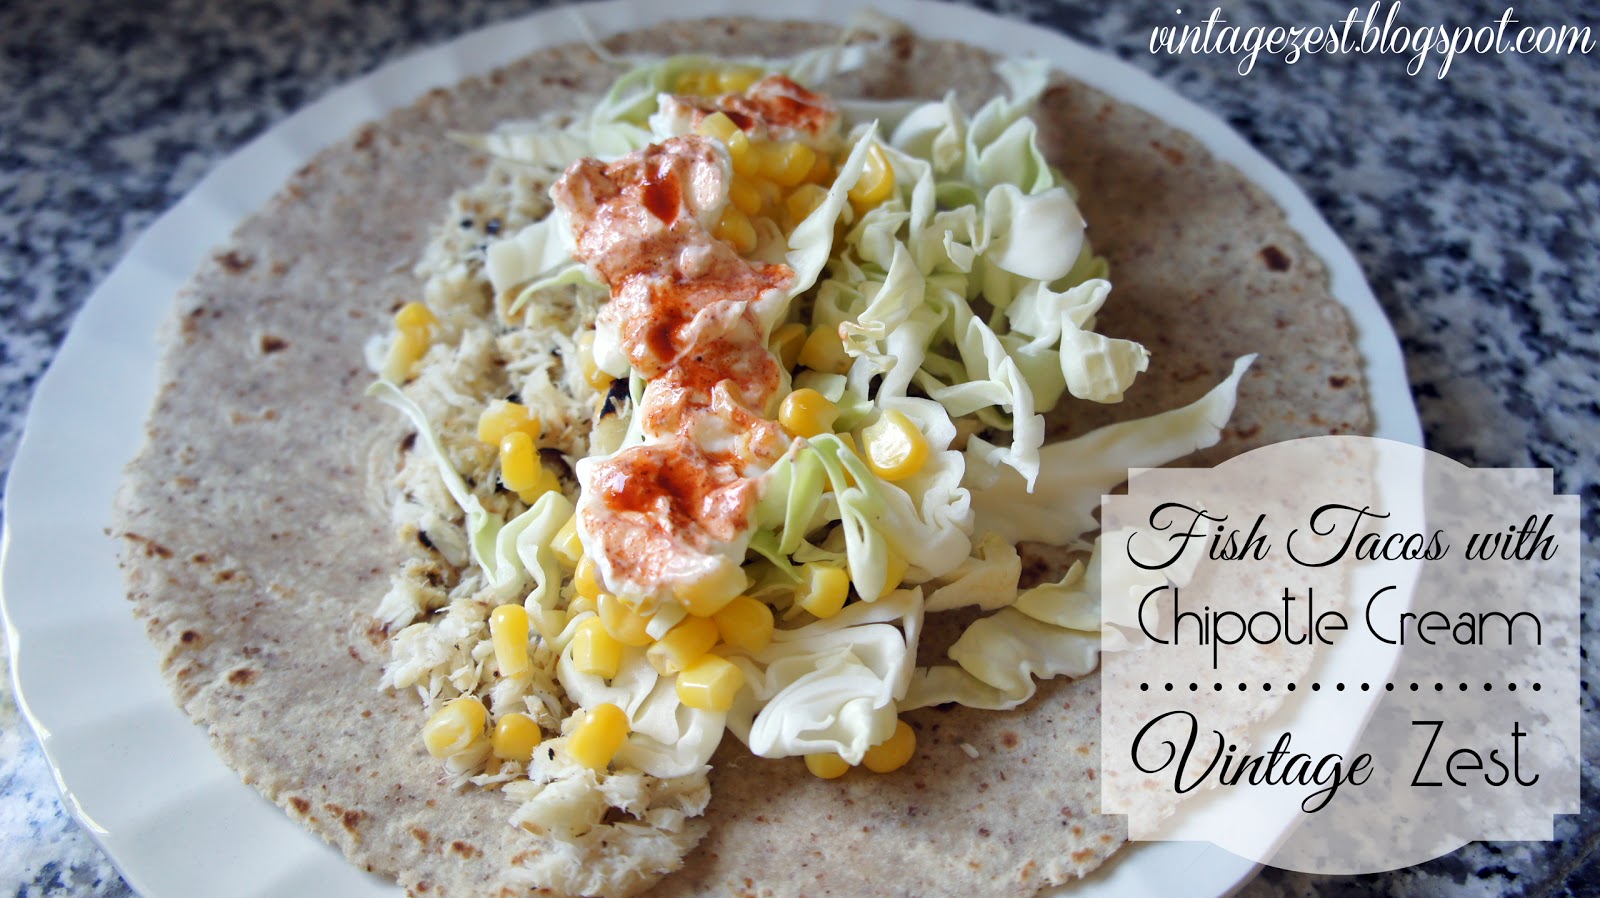 Fish Tacos with Chipotle Cream on Diane's Vintage Zest!